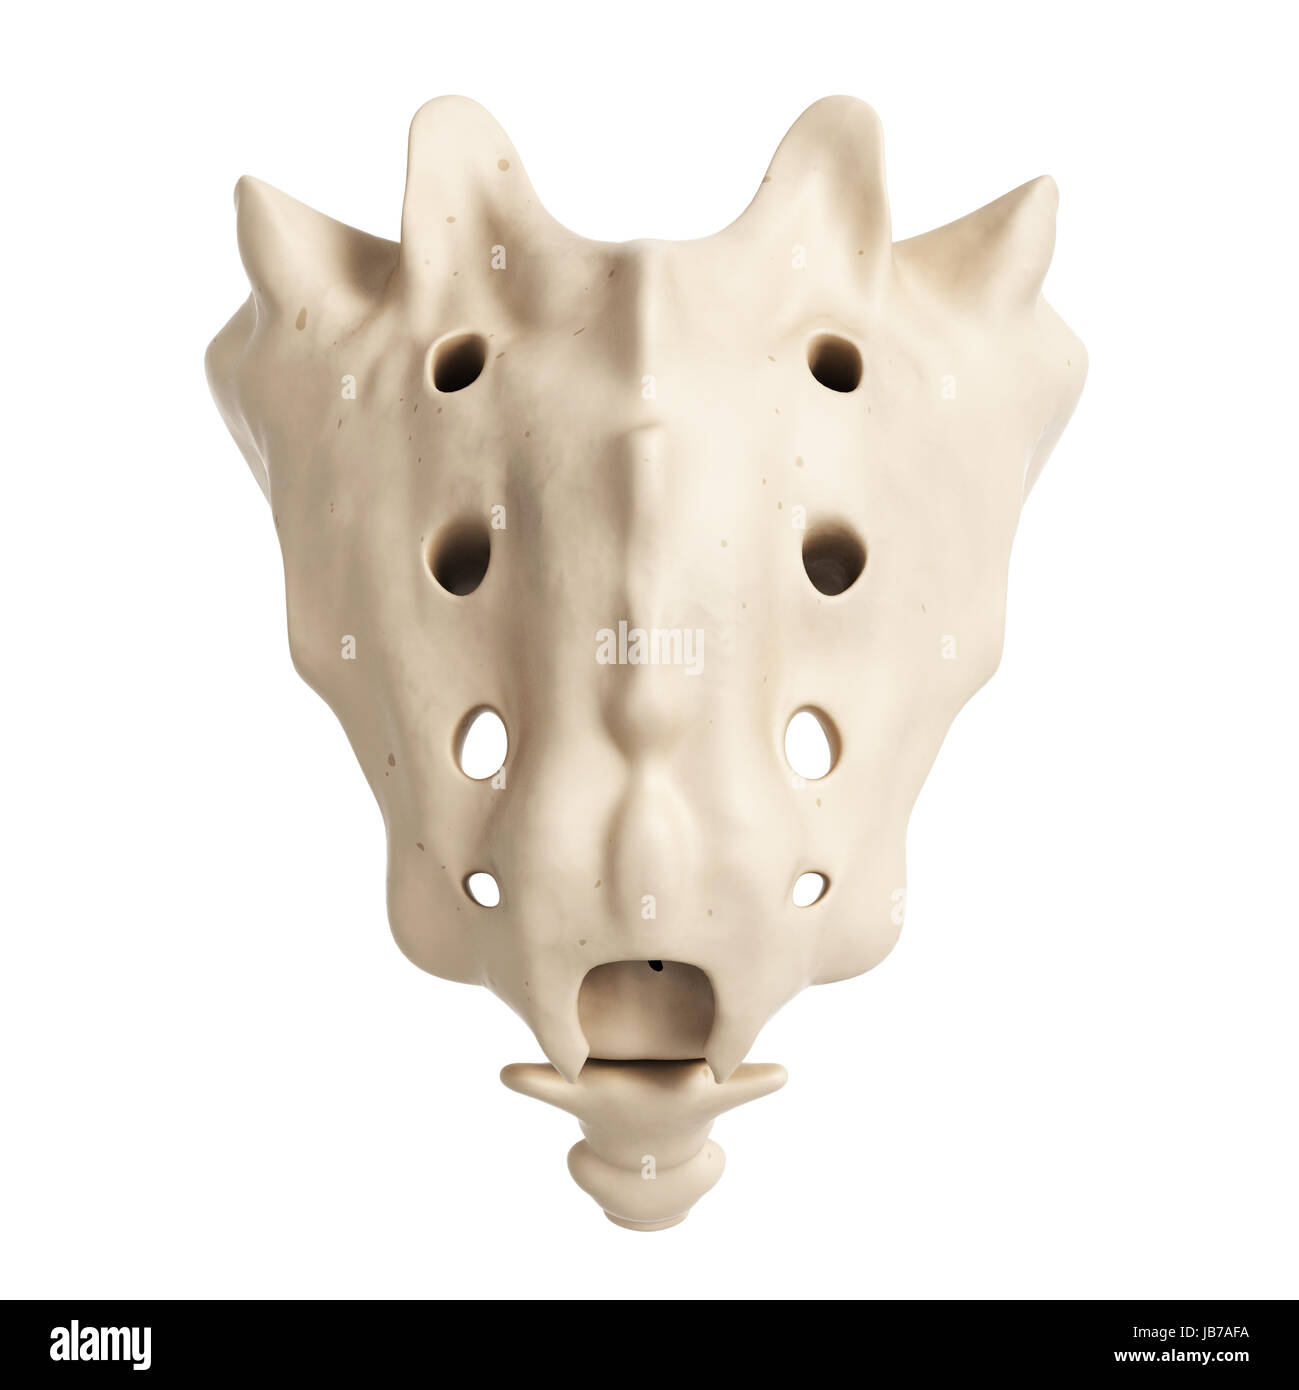 3d rendered illustration of the sacrum Stock Photo